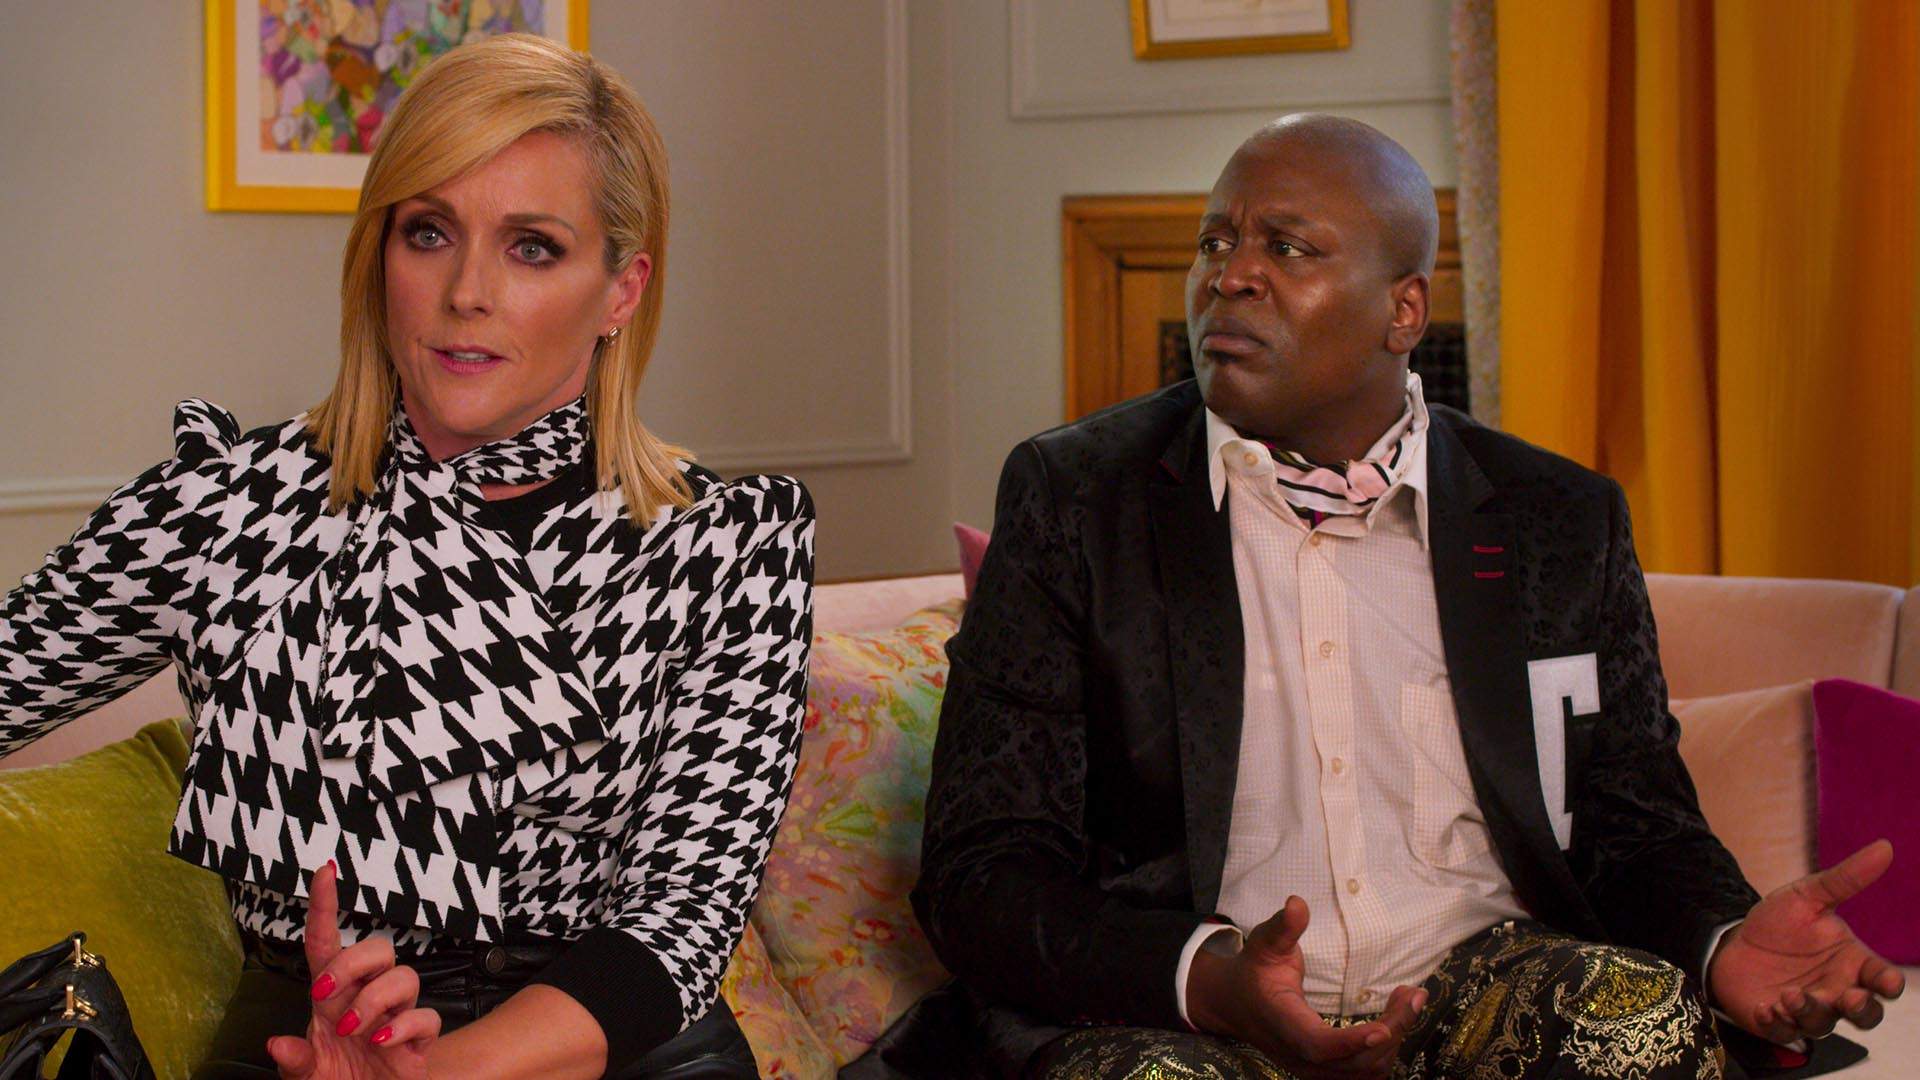 The Trailer for the Choose-Your-Own-Adventure Episode of 'Unbreakable Kimmy Schmidt' Is Here